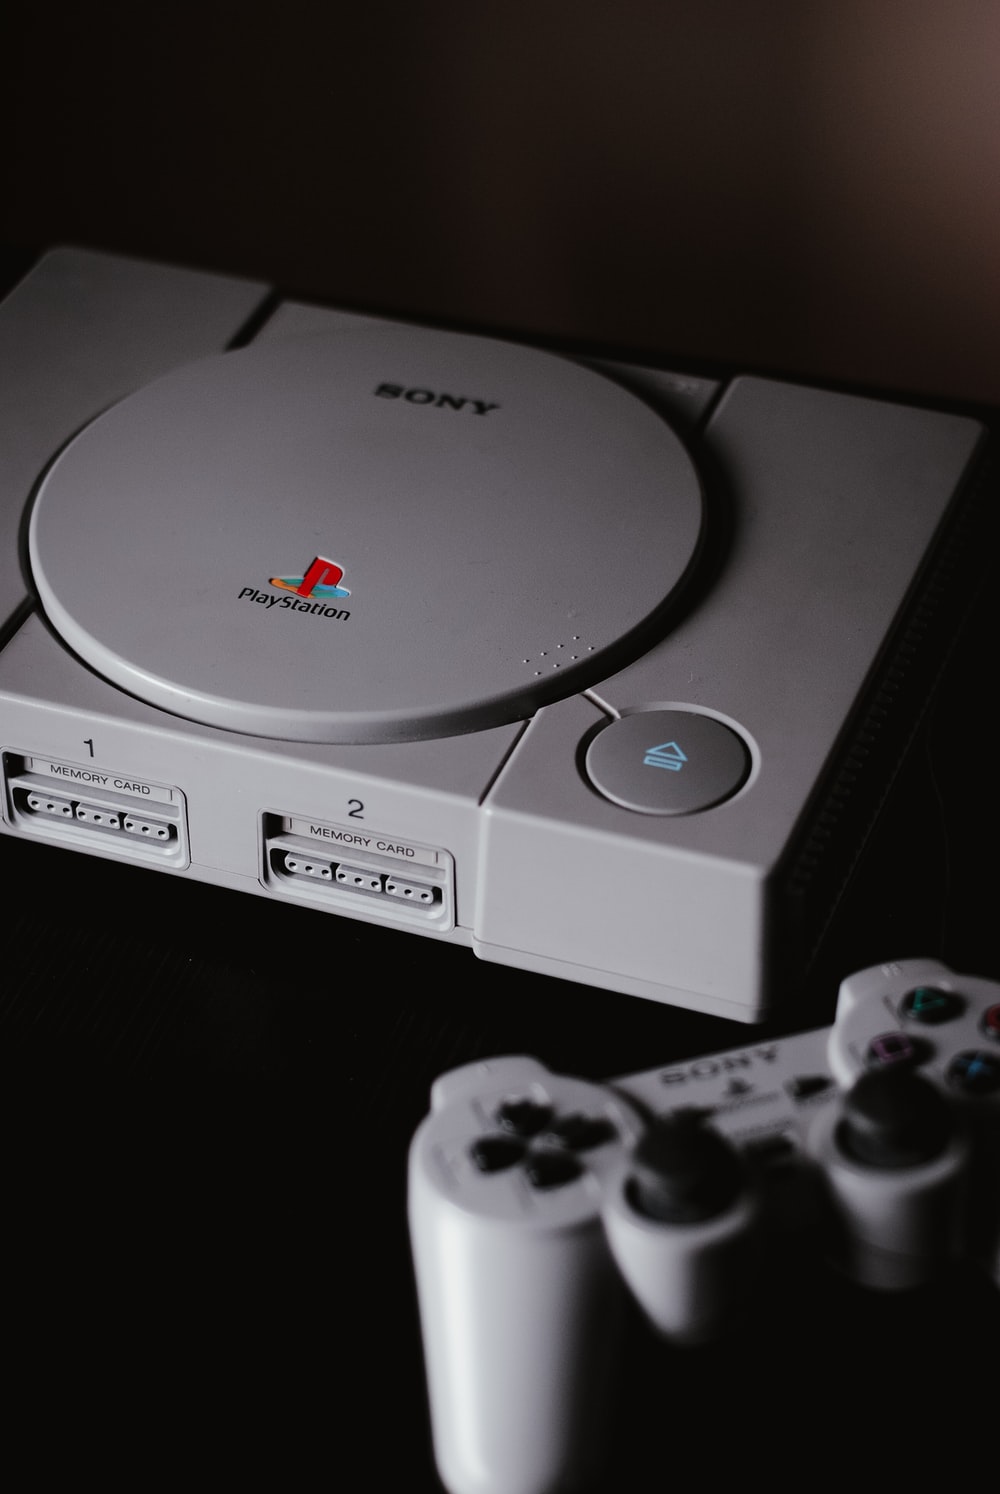 Playstation 3 Picture. Download Free Image